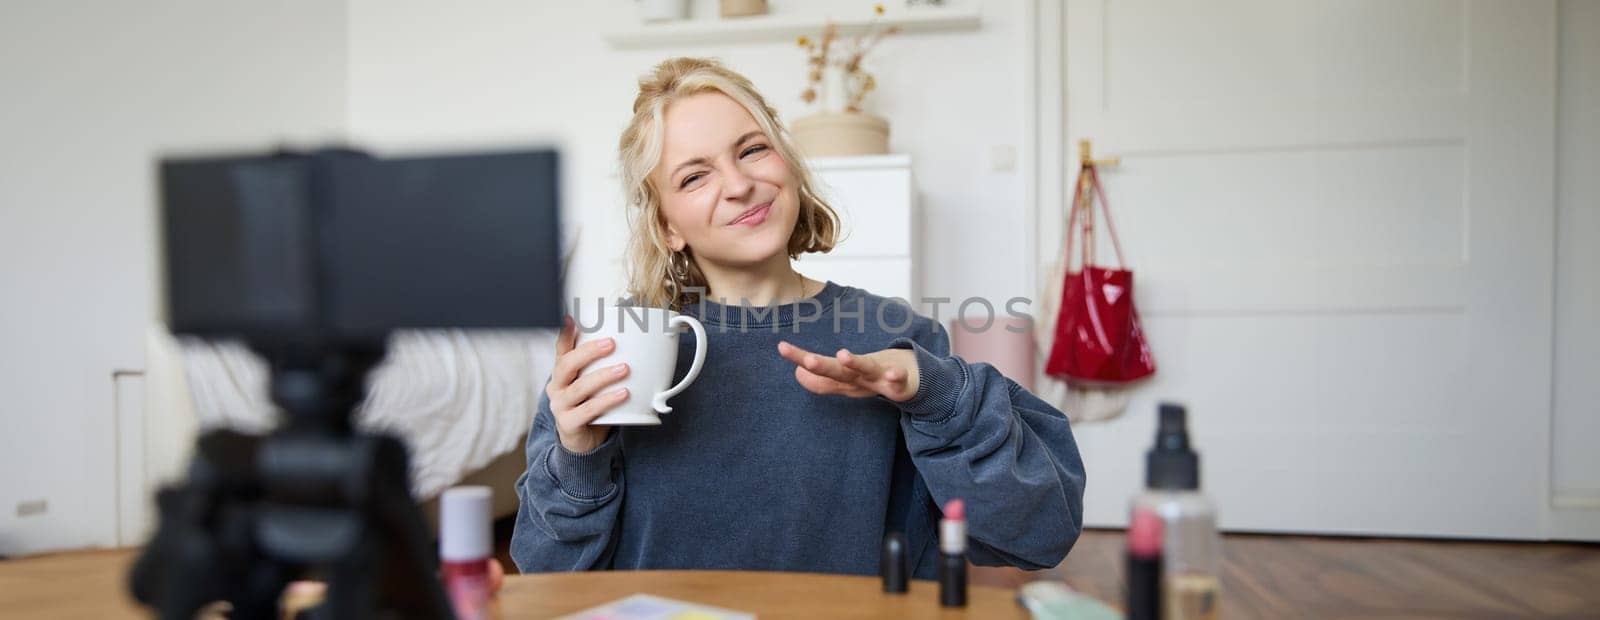 Portrait of stylish lifestyle blogger, woman talking in front of video camera, records vlog about her day in life, drinks tea and speaks to audience.